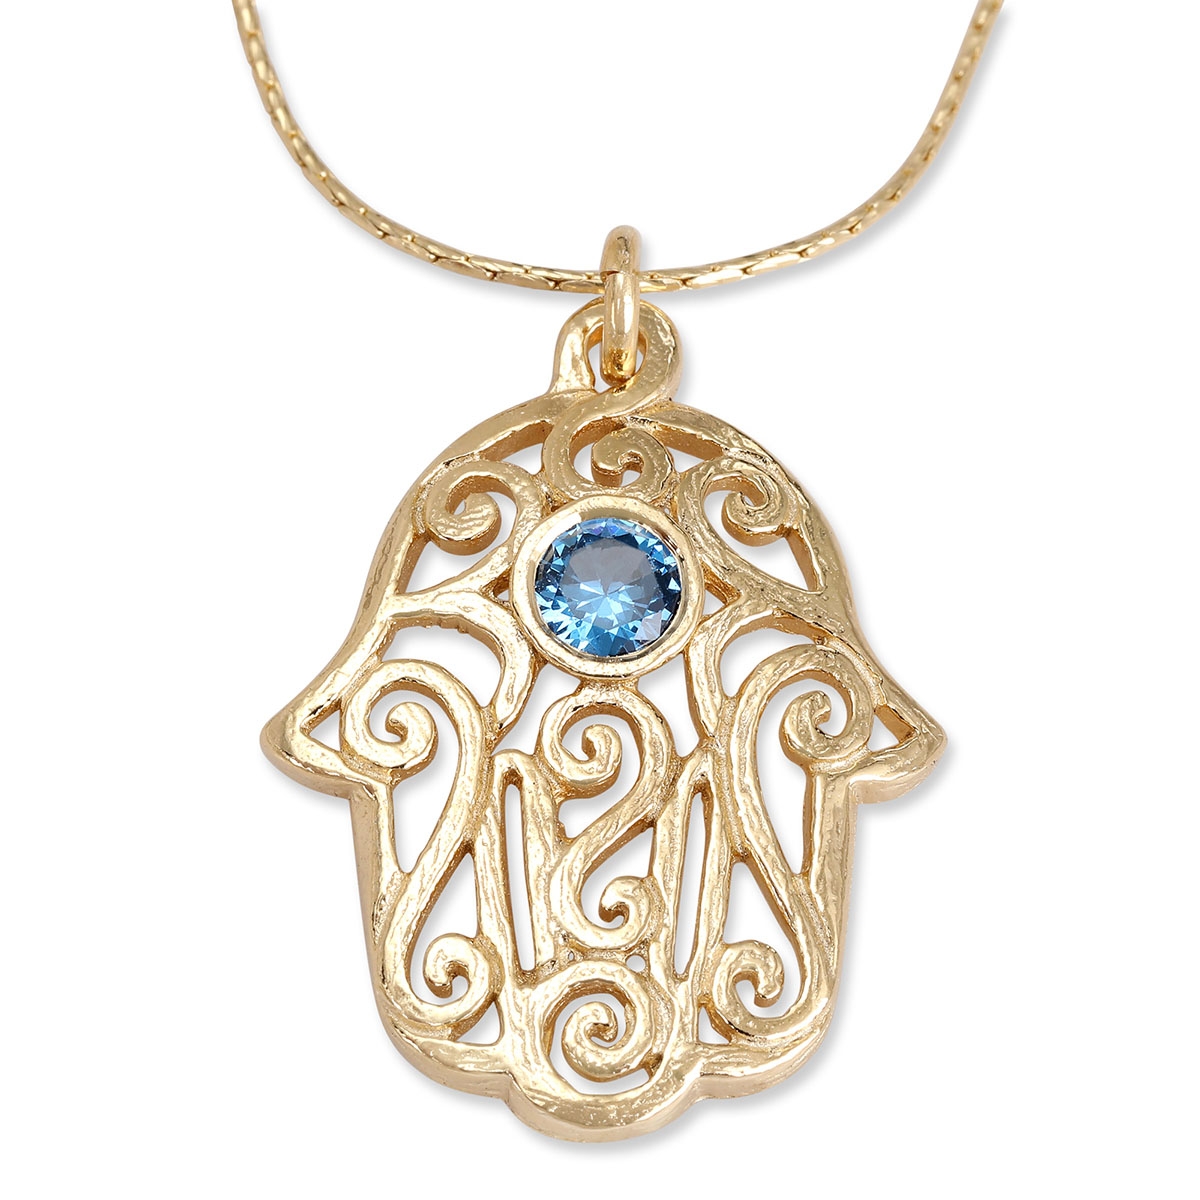 Gold-Plated Filigreed Hamsa Necklace With Blue Gemstone - 1